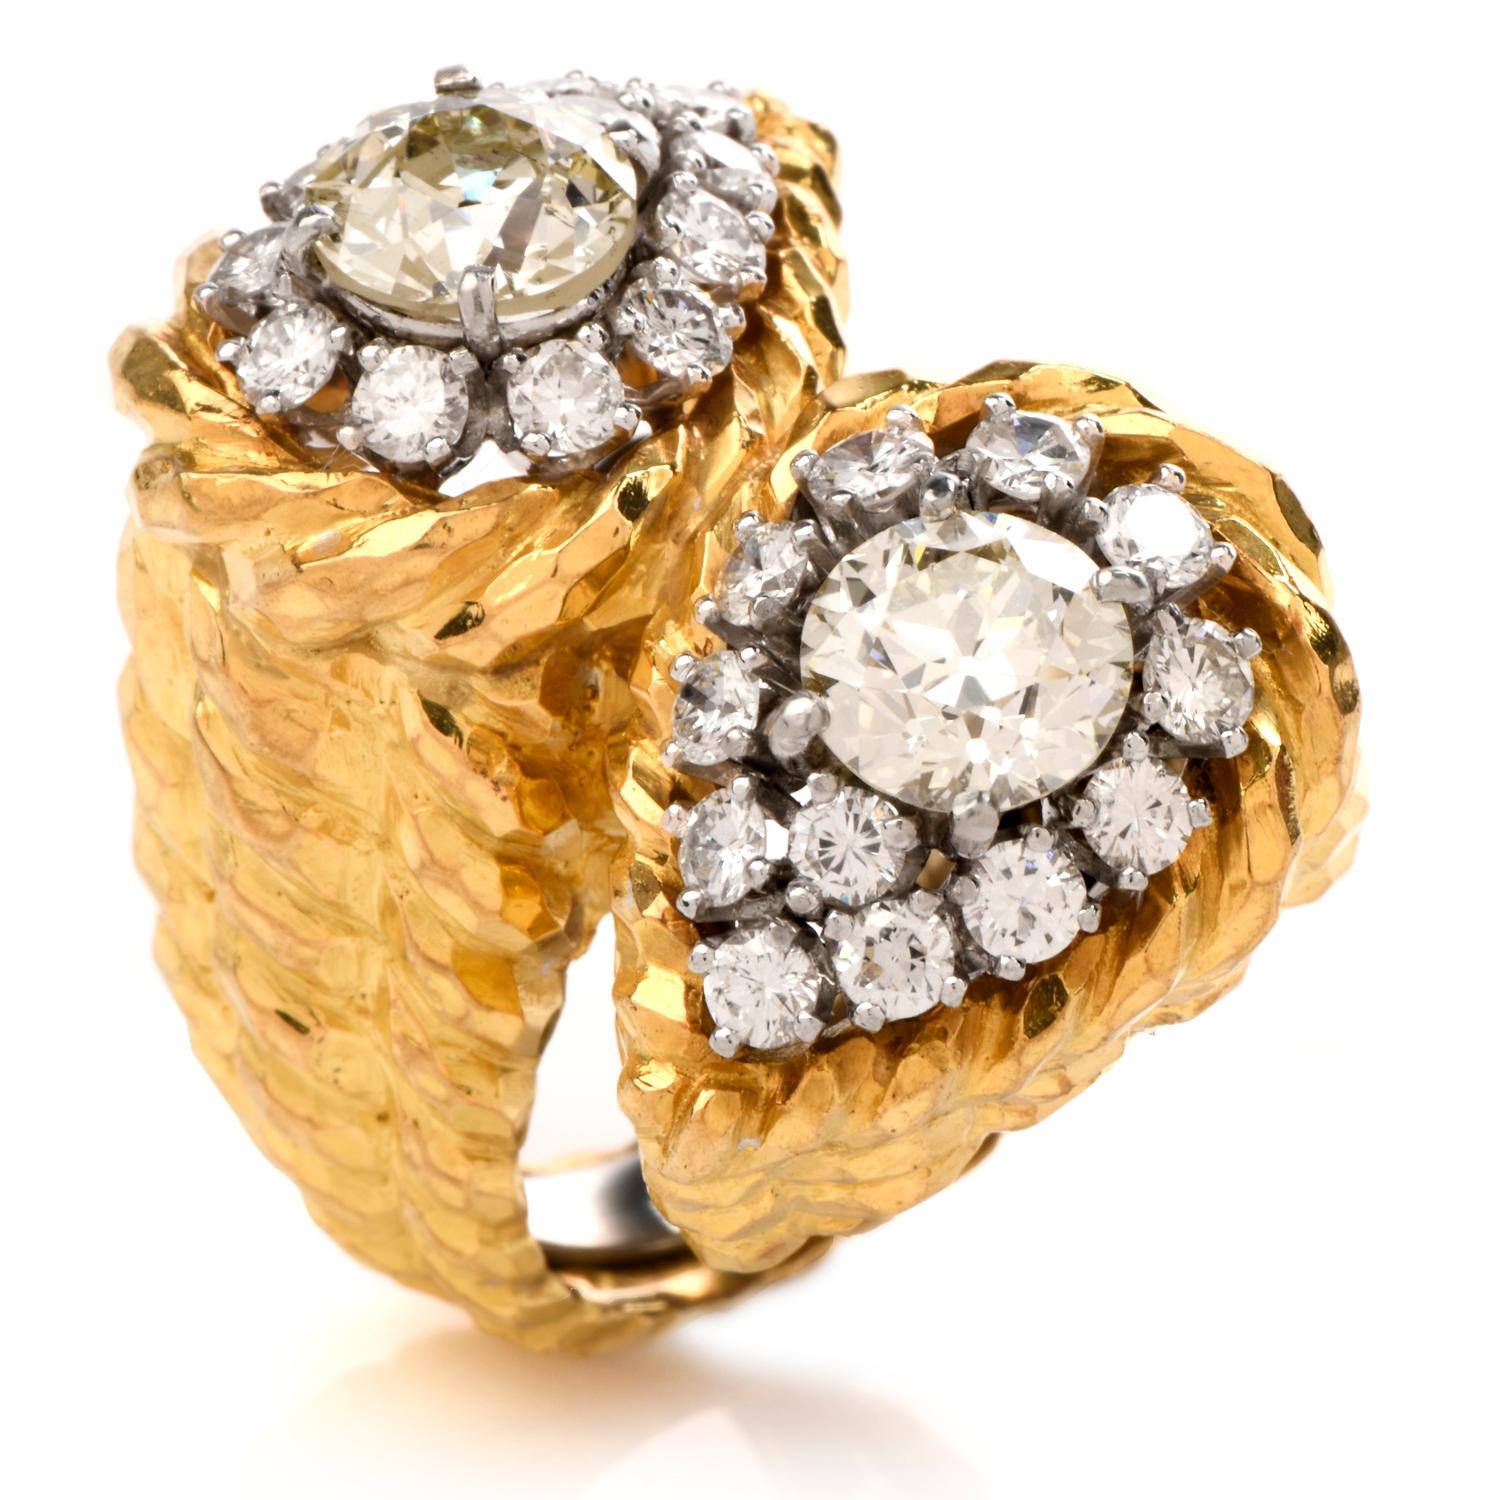 This extravagant designer David Webb diamond cocktail ring is crafted in 18-karat yellow gold and platinum, weighing 27 grams and measuring 28mm x 14mm high. Showcasing a bypass design set with a pair of centered, prong set, round cut diamonds. One